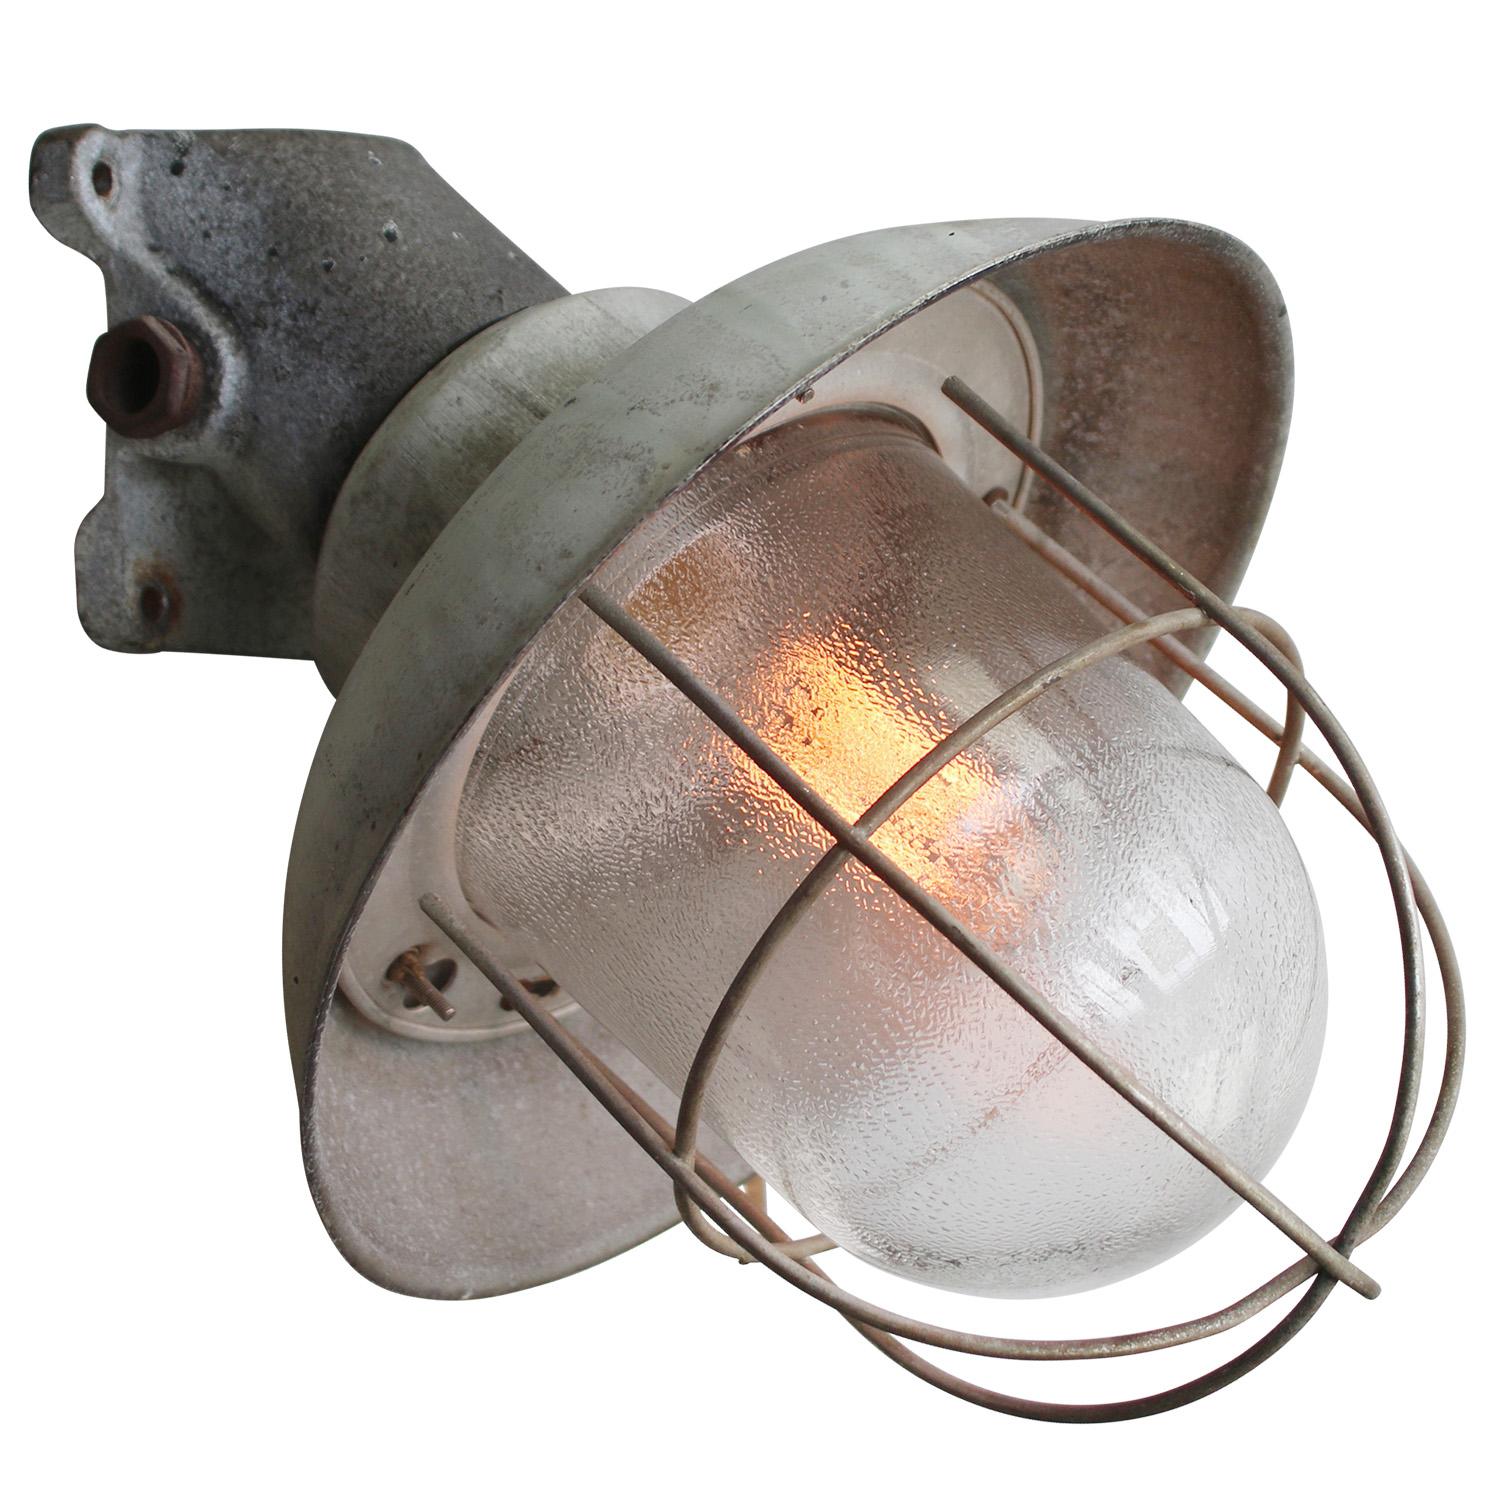 Aluminum industrial pendant lamp
Gray aluminum shade with cast iron base
frosted glass 

Weight: 2.70 kg / 6 lb

Priced per individual item. All lamps have been made suitable by international standards for incandescent light bulbs, energy-efficient